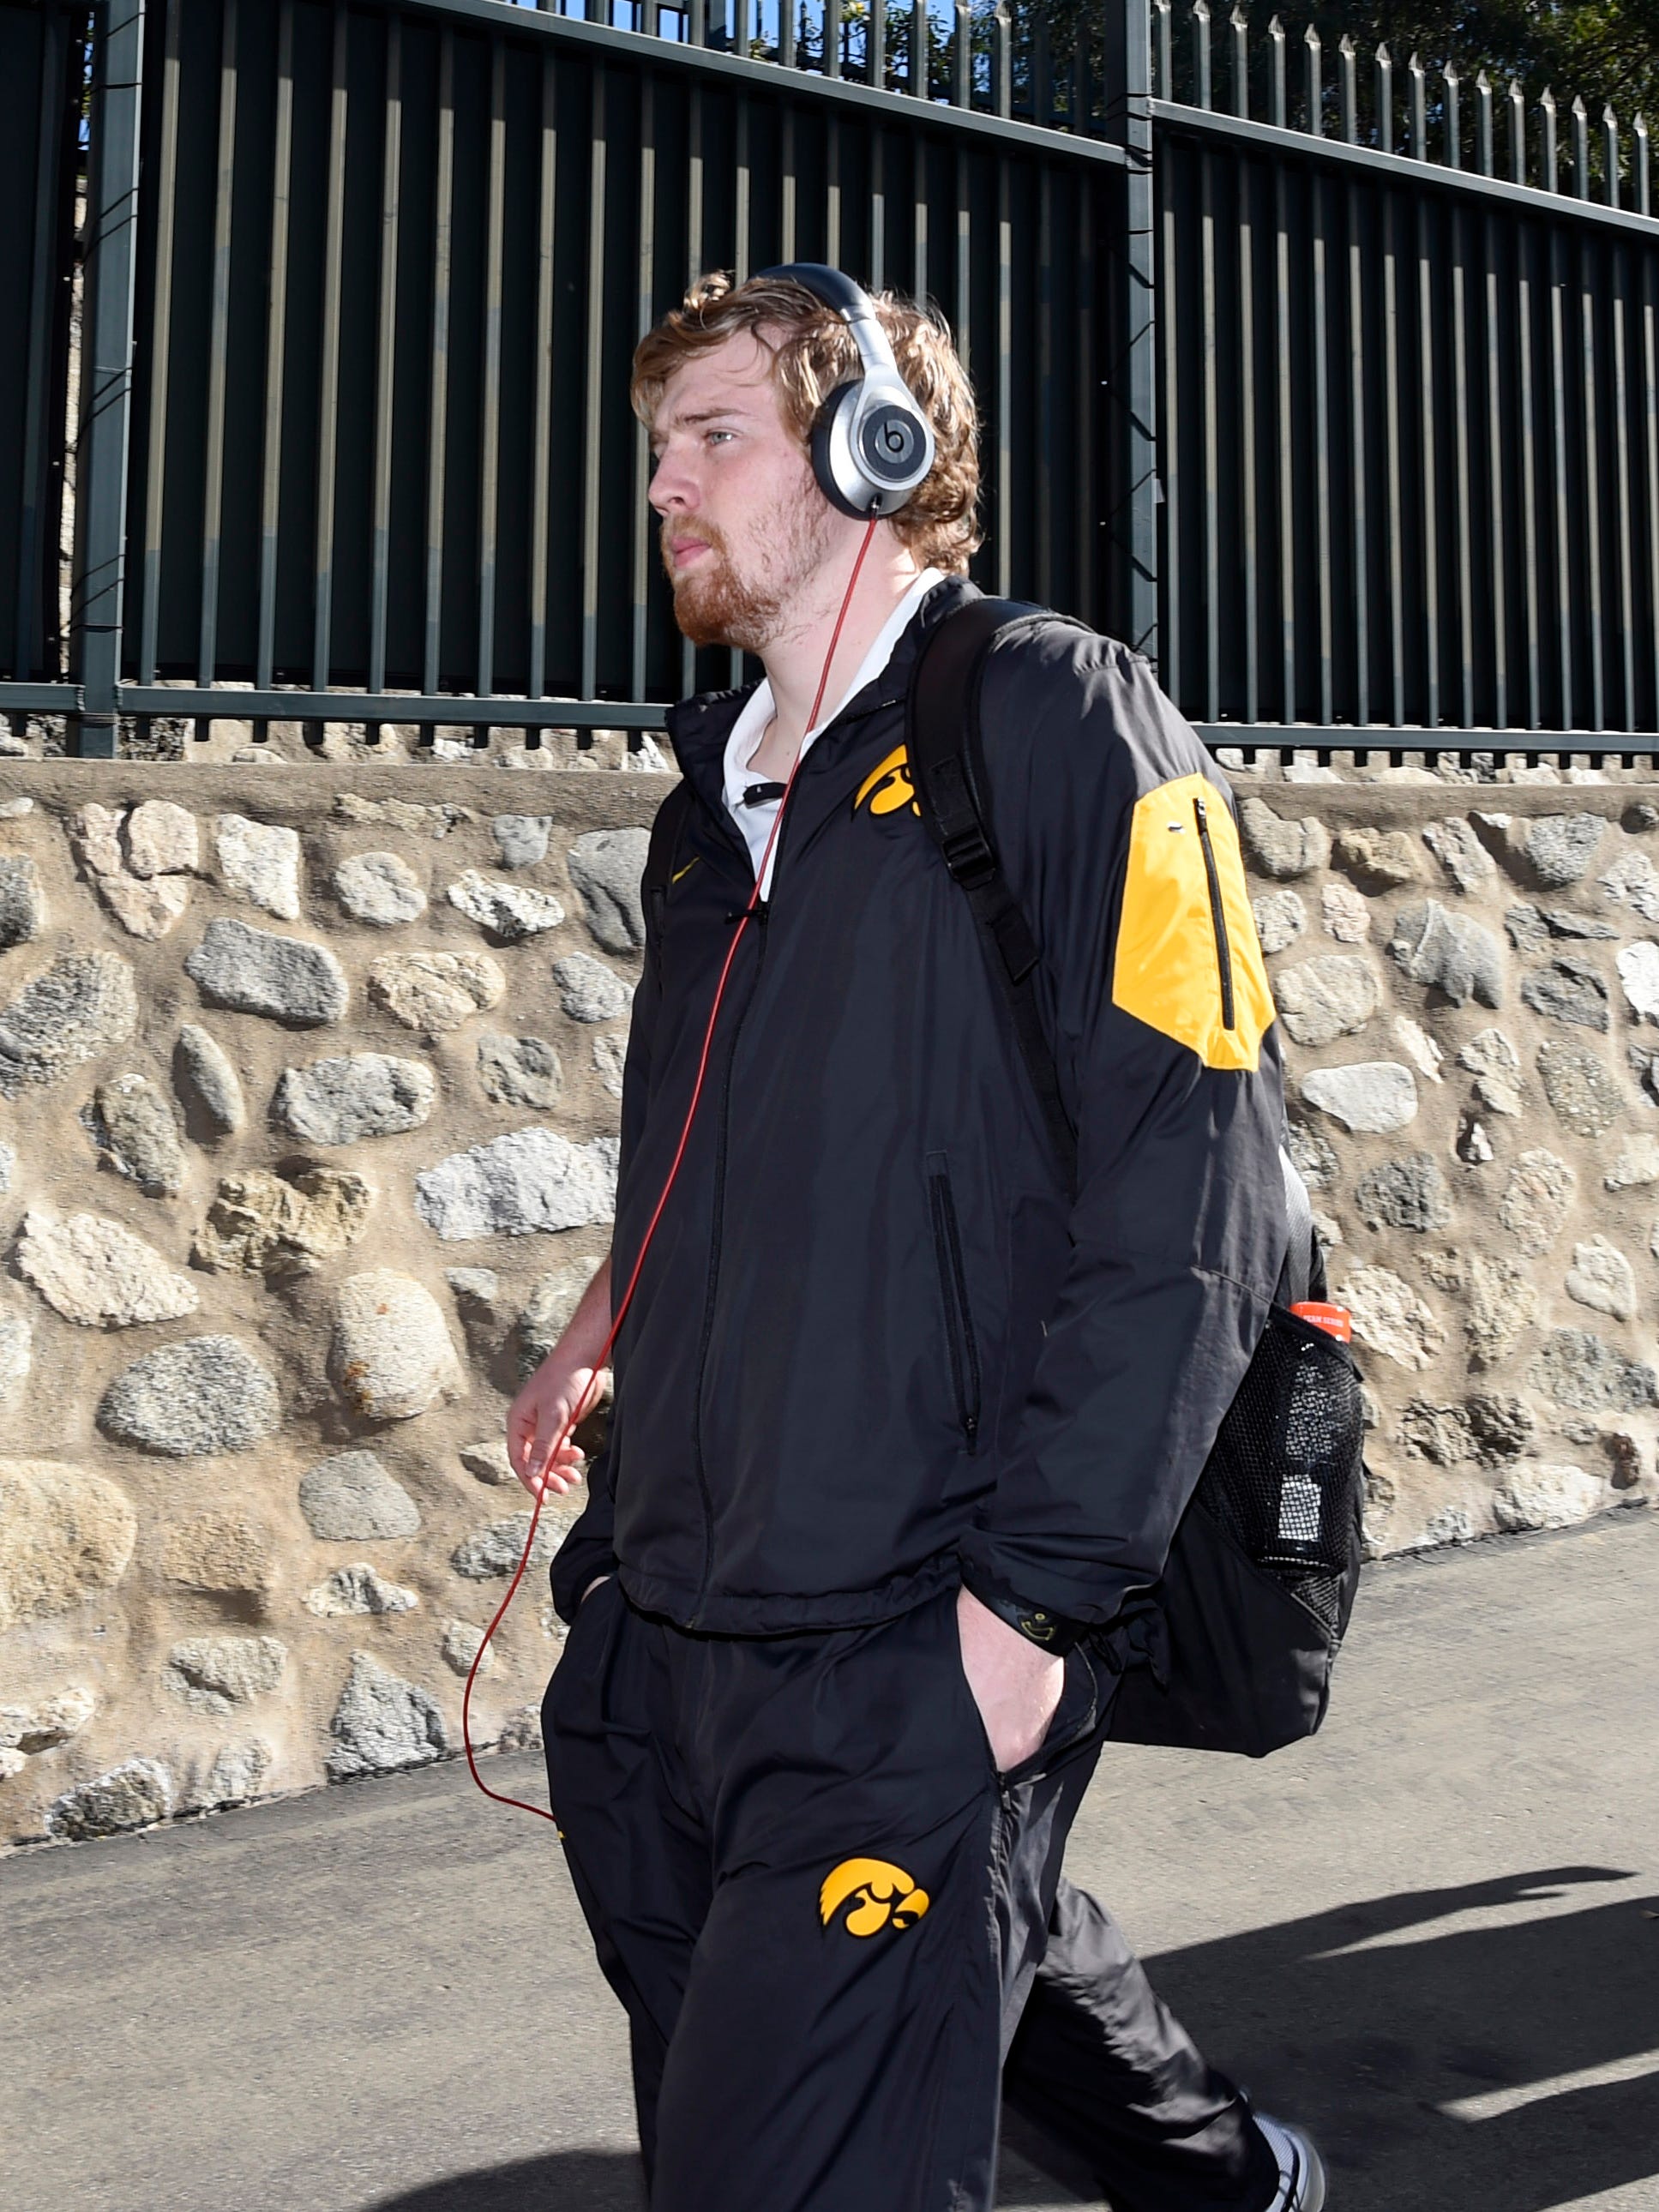 Iowa Hawkeyes quarterback C.J. Beathard (16) arrives before the game between the Iowa Hawkeyes and the Stanford Cardinal in the 2016 Rose Bowl at Rose Bowl.